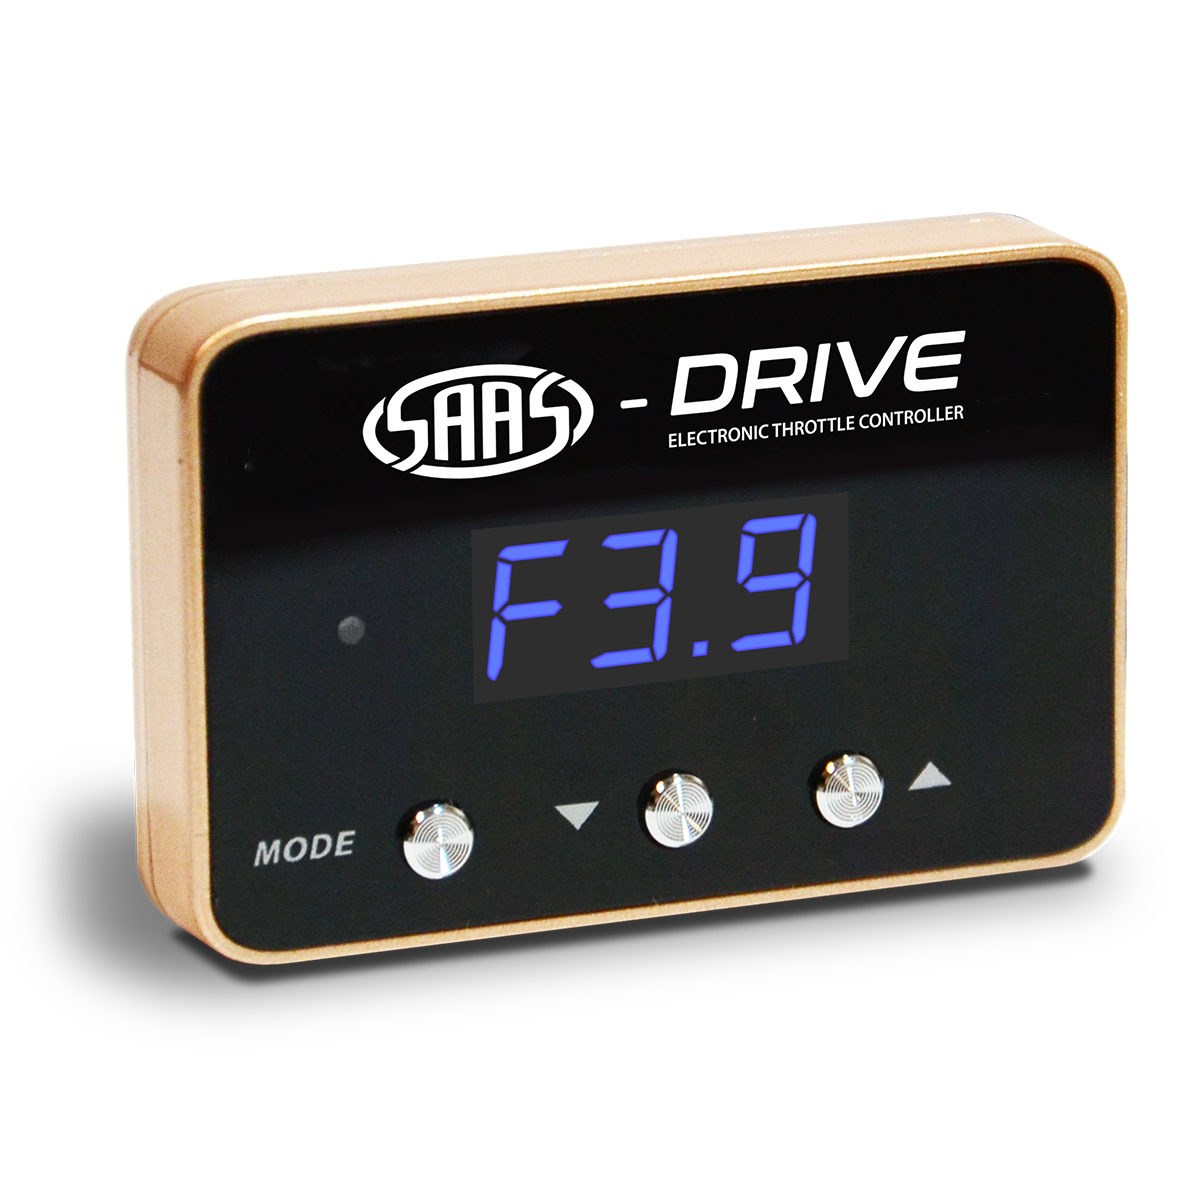 SAAS-Drive Audi RS6 C6 Typ 4F 2008 - 2010 Throttle Controller 